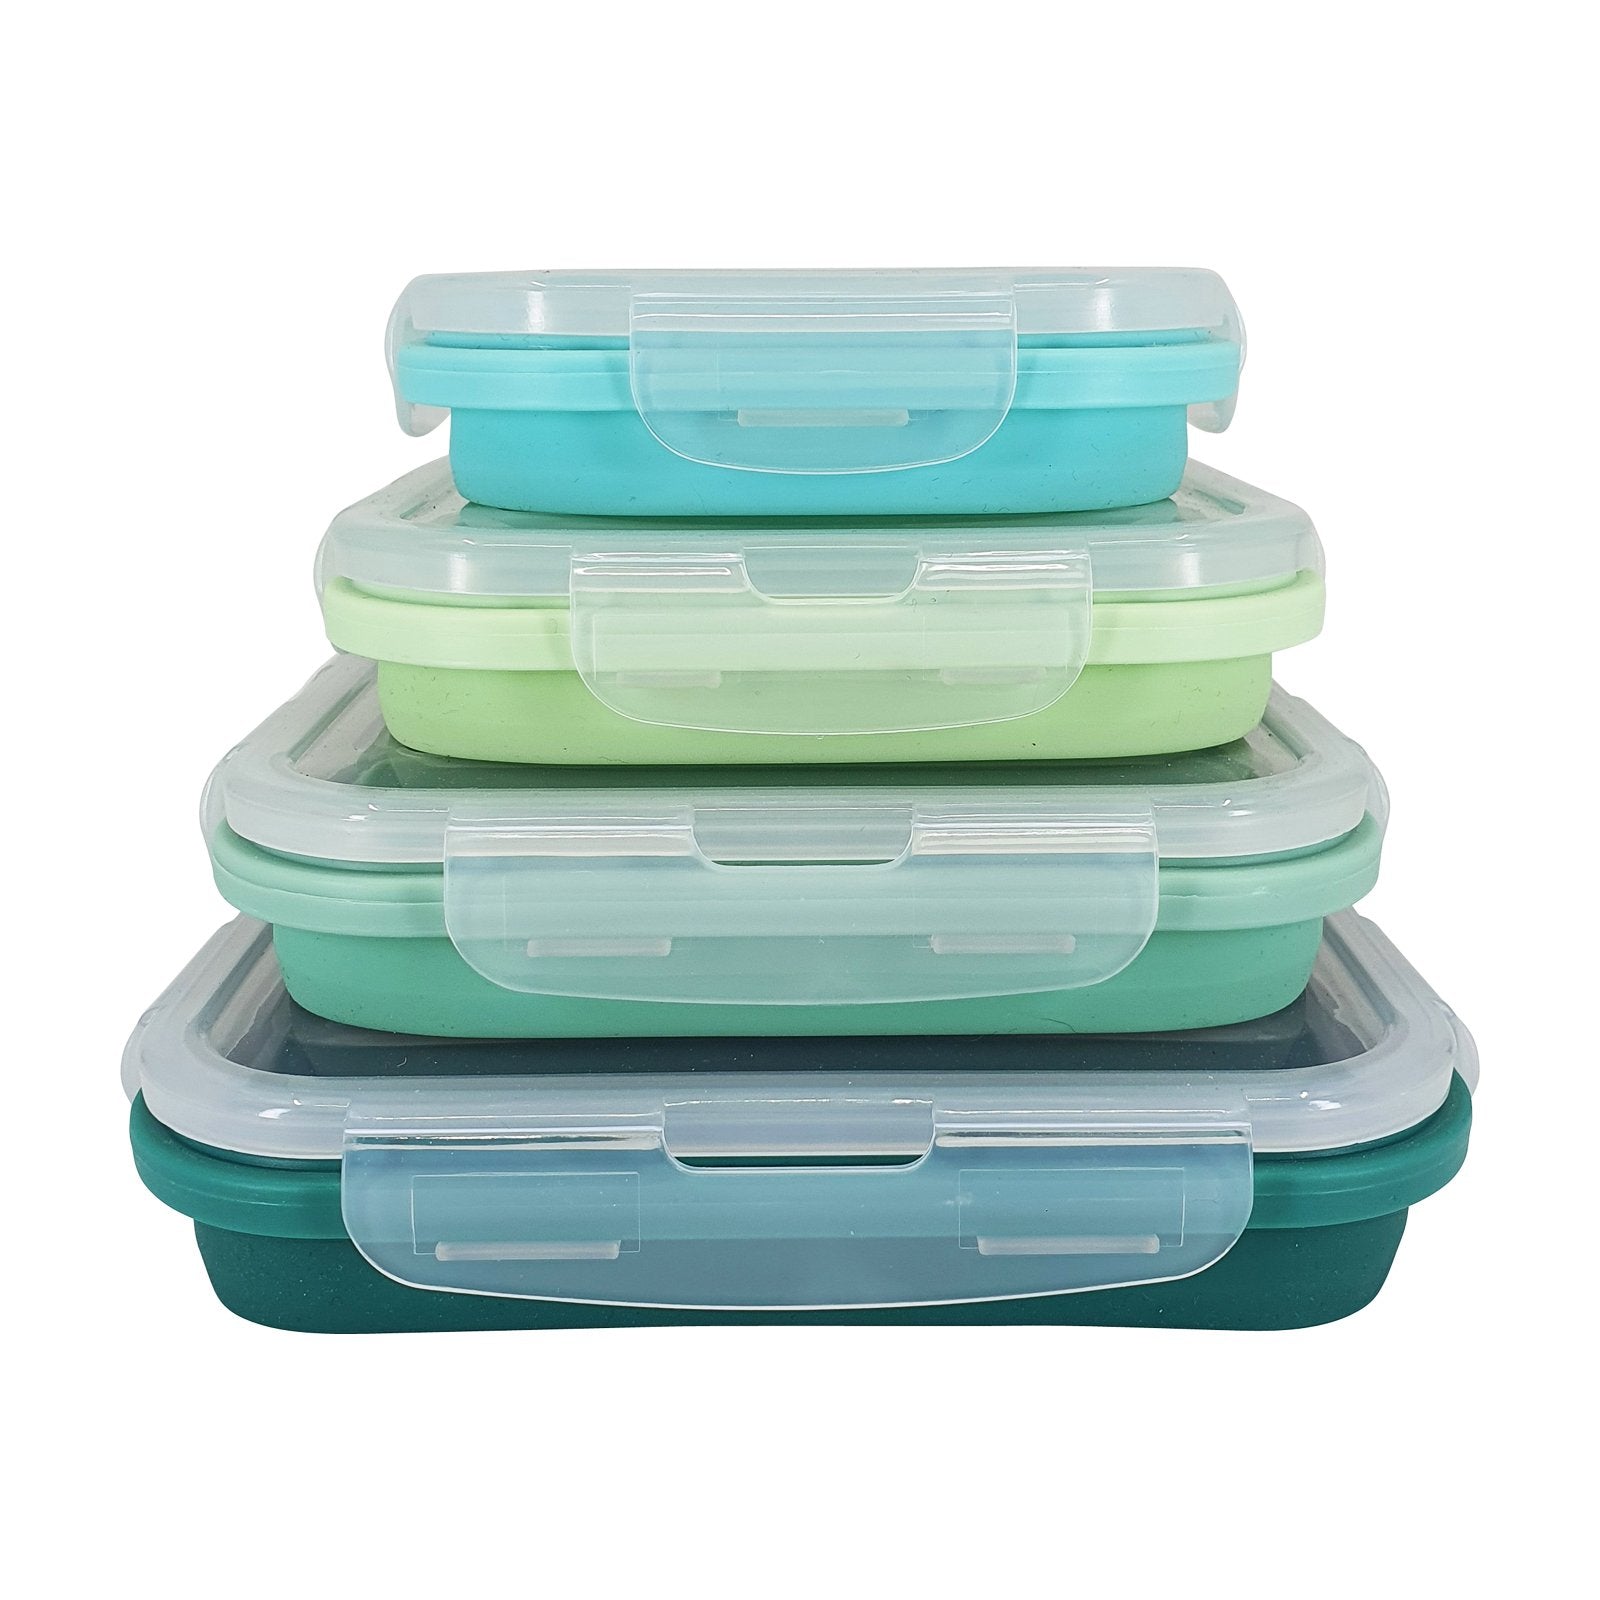 VIGIND vigind collapsible silicone food storage containers,flat